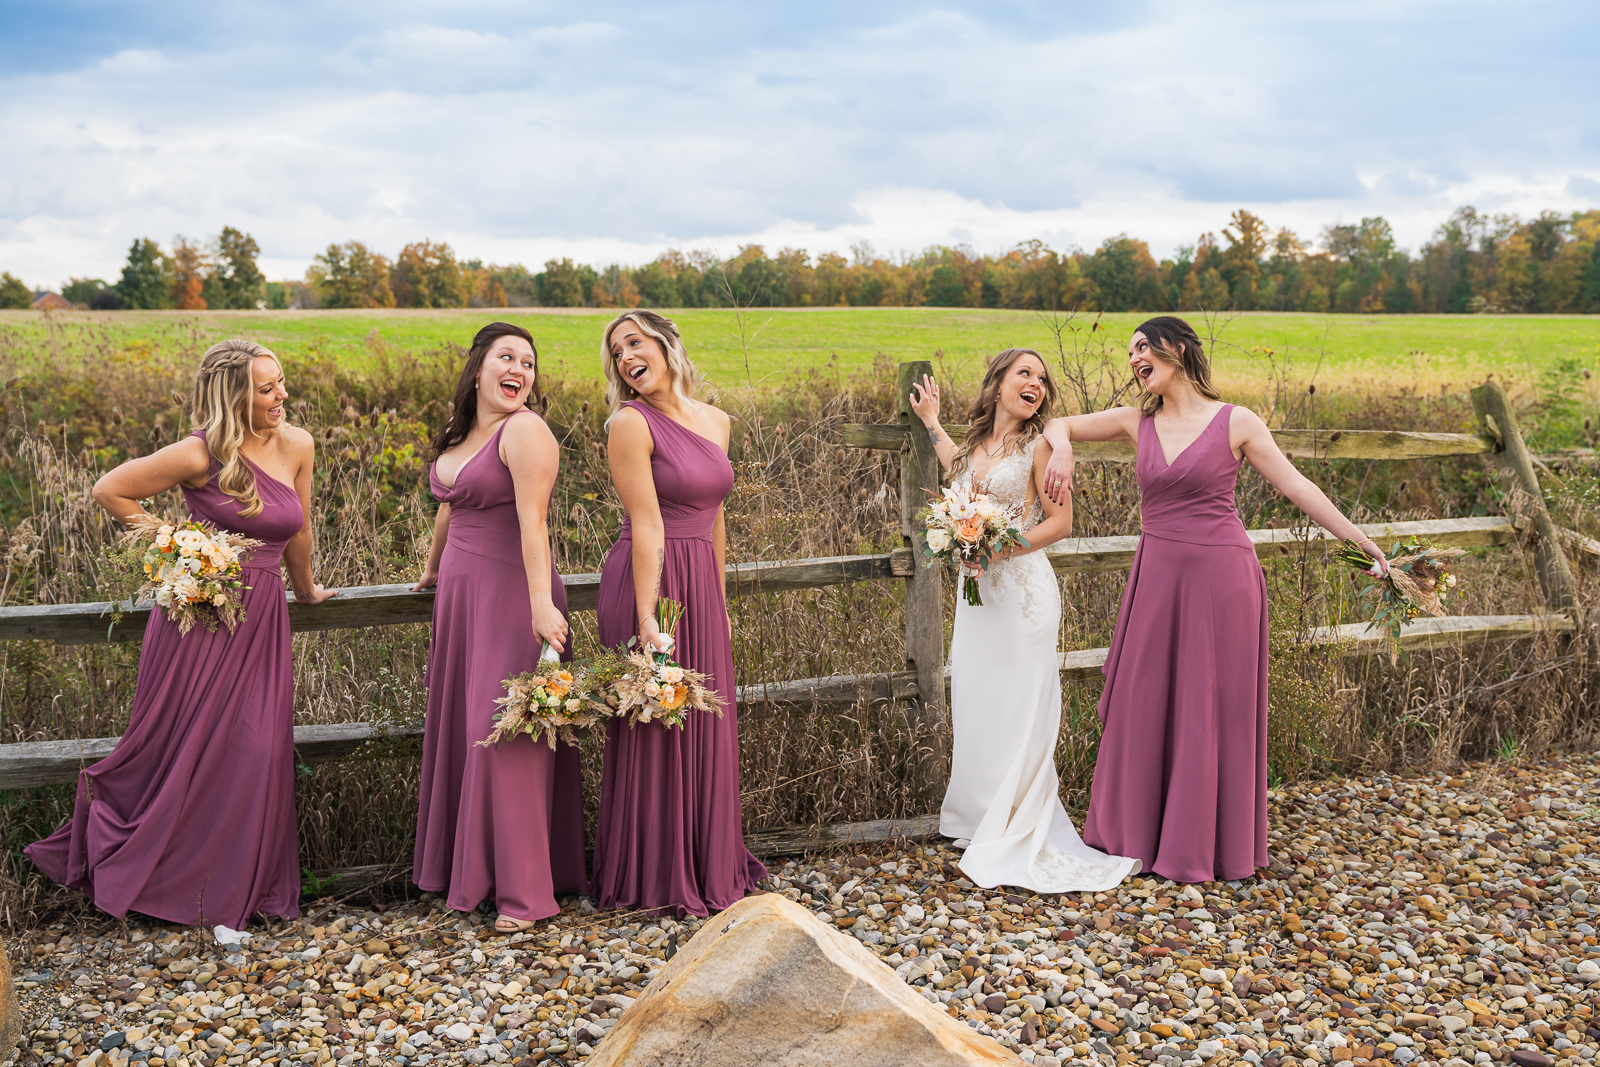 Bride with bridesmaids, smile, laugh, bridal party portrait, fun bridal party portrait, field, fence, nature, fall wedding, outdoor wedding ceremony at White Birch Barn